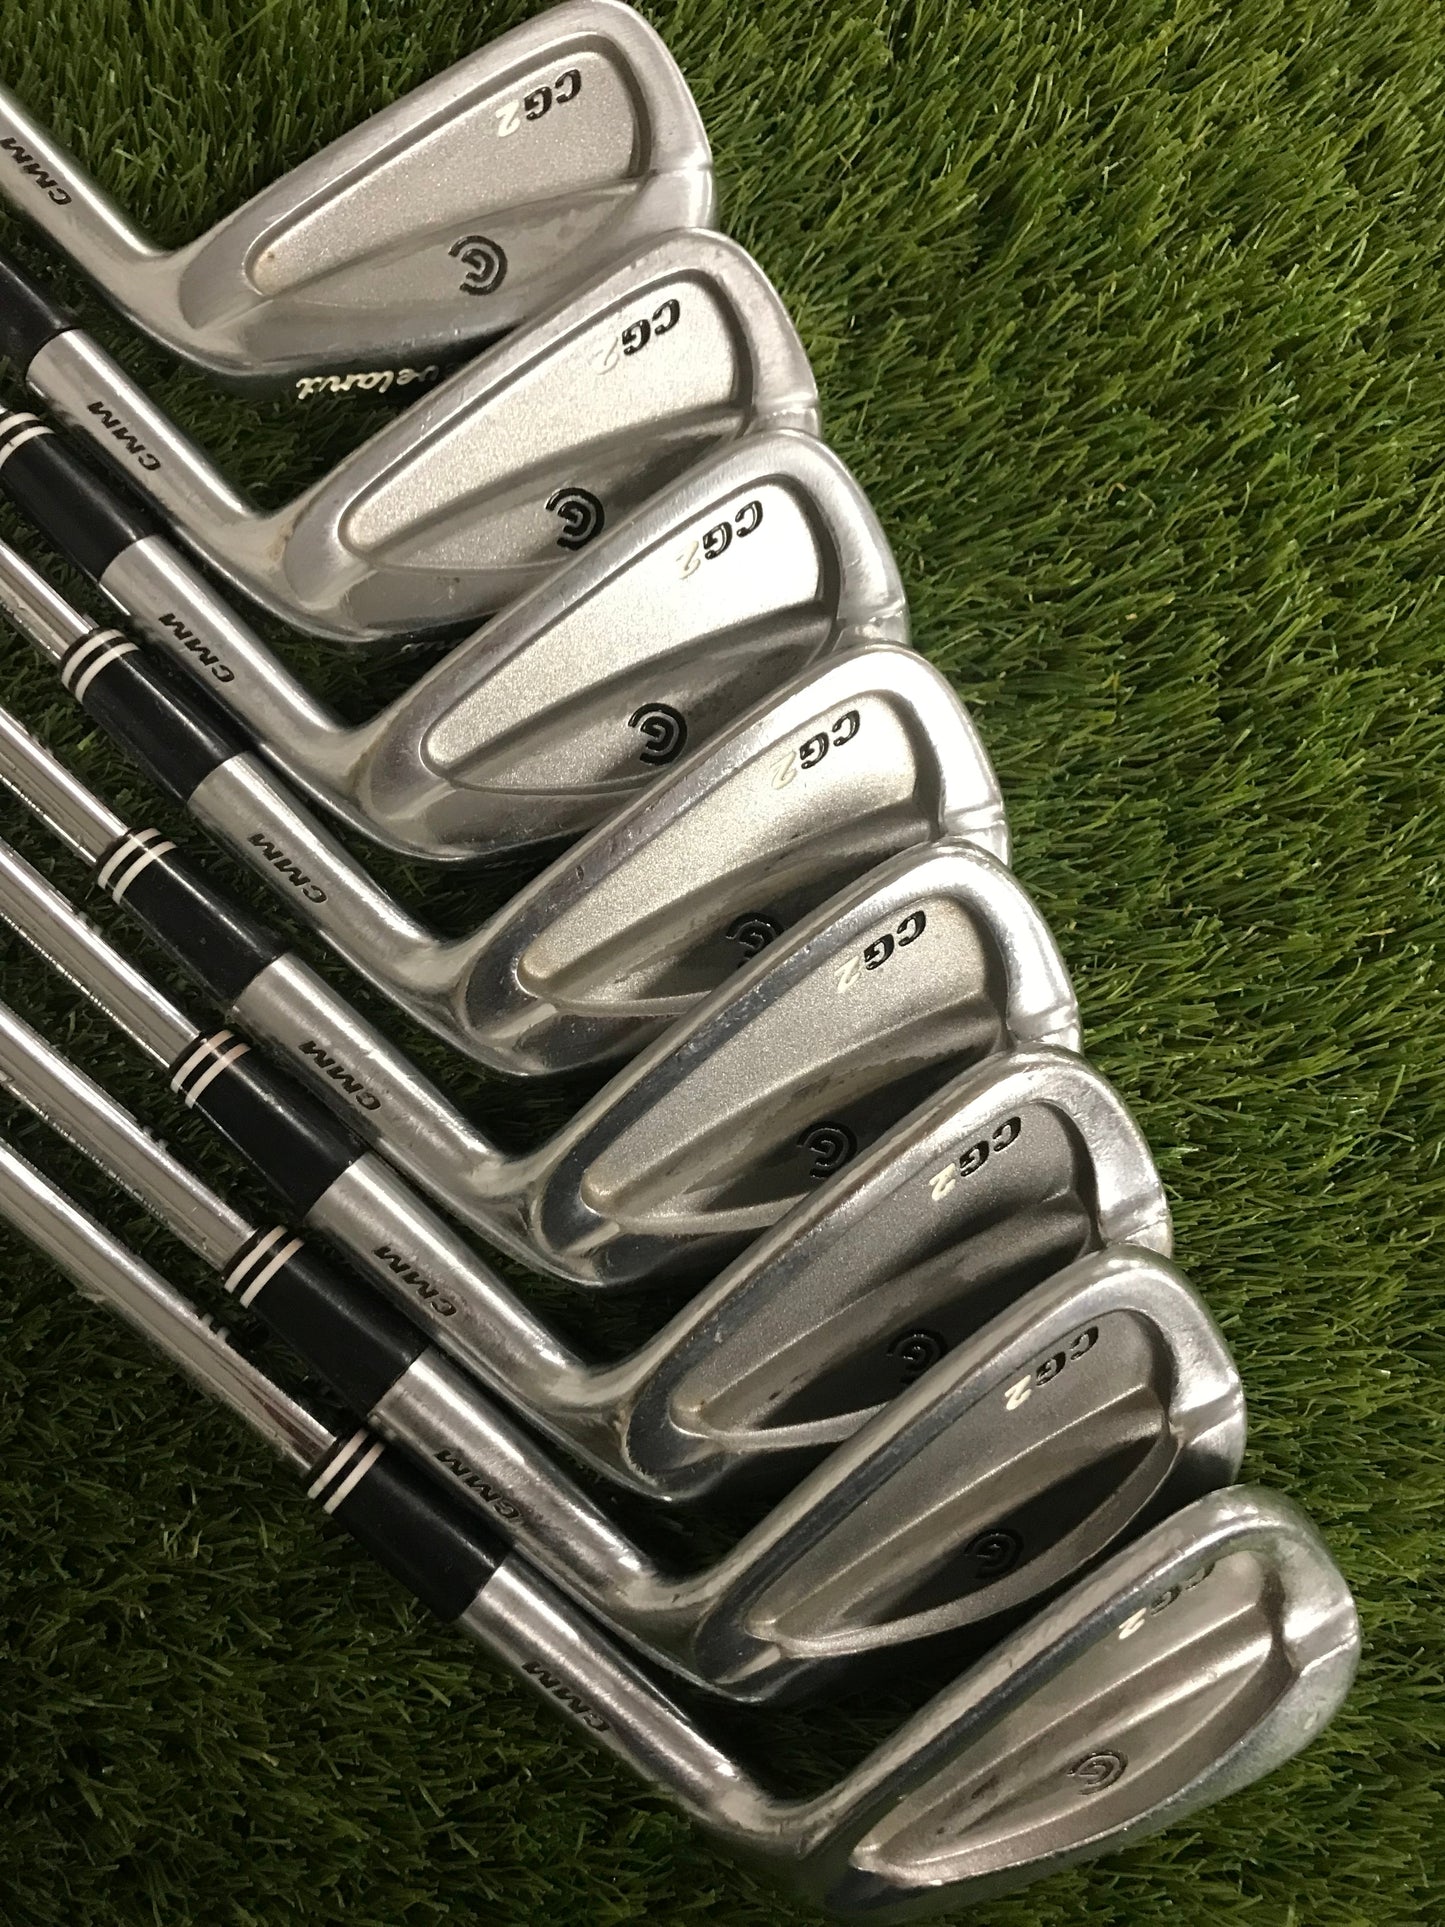 Cleveland CG2 Irons 3-PW